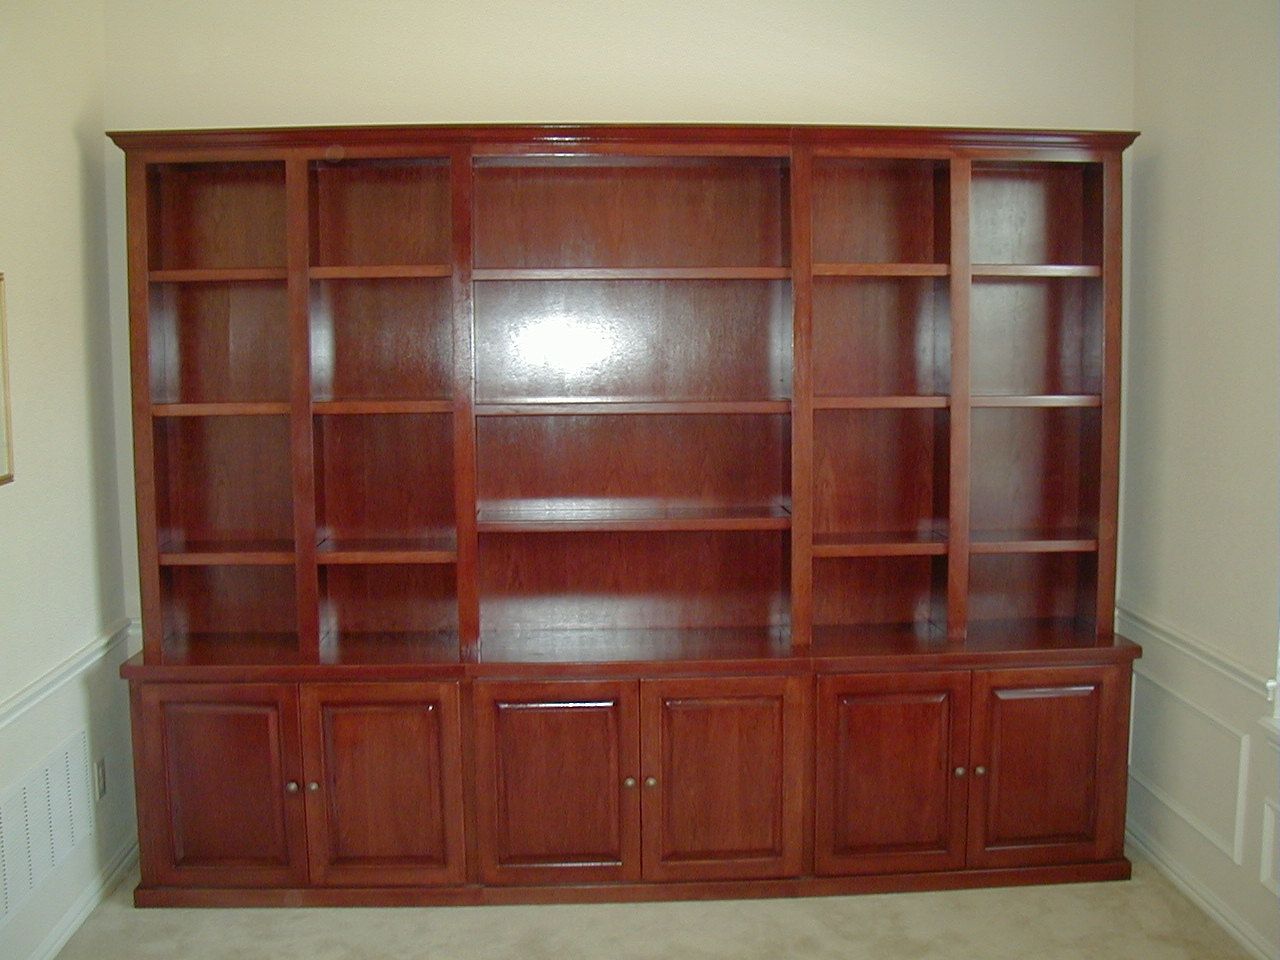 Bookcases Fiorenza Custom Woodworking Throughout Bookcase With Bottom Cabinets 